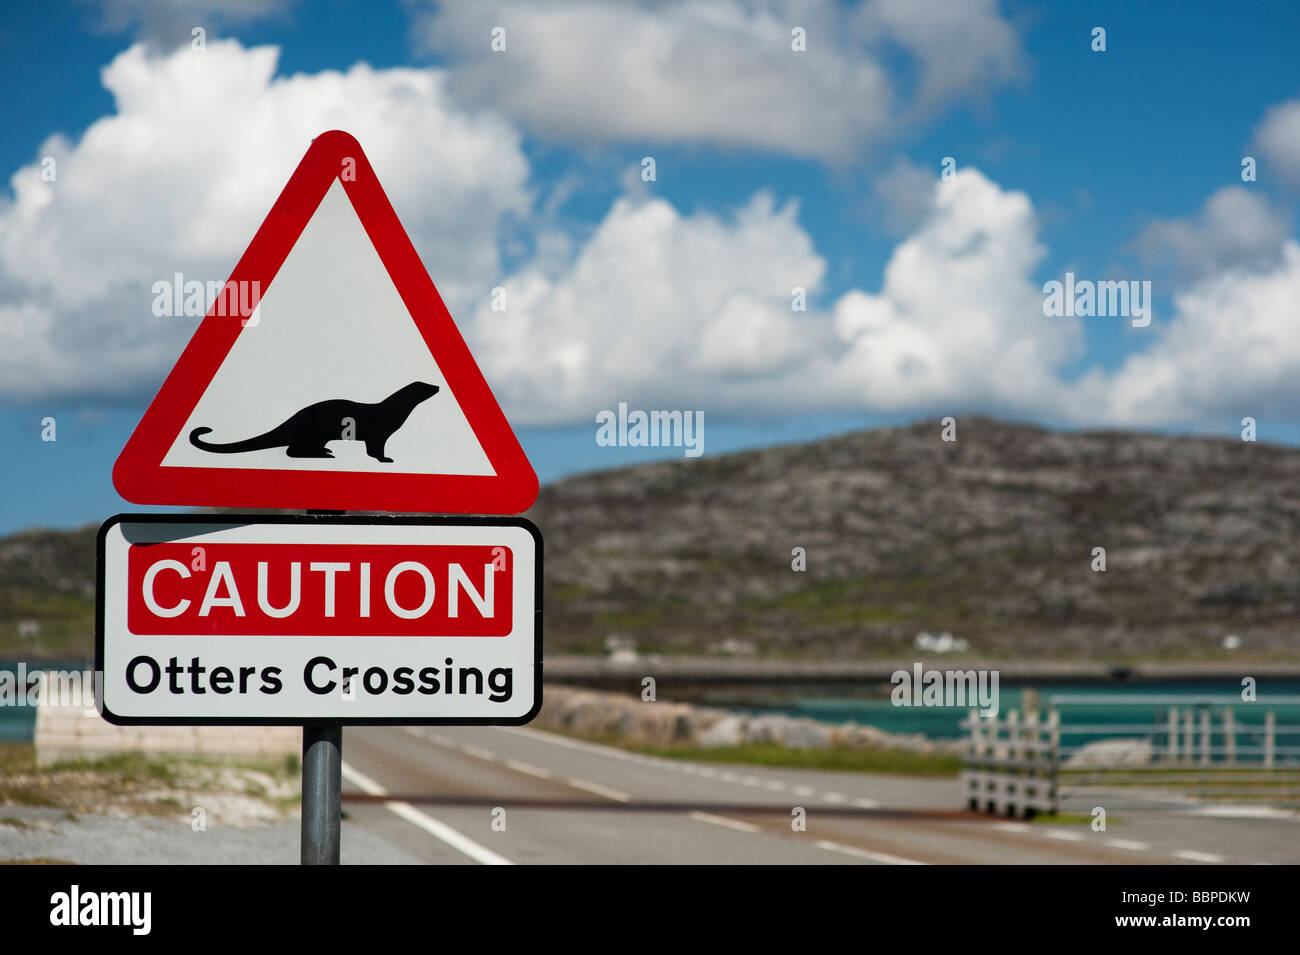 Otter crossing road sign, Eriskay causeway, South Uist, Outer Hebrides, Scotland Stock Photo